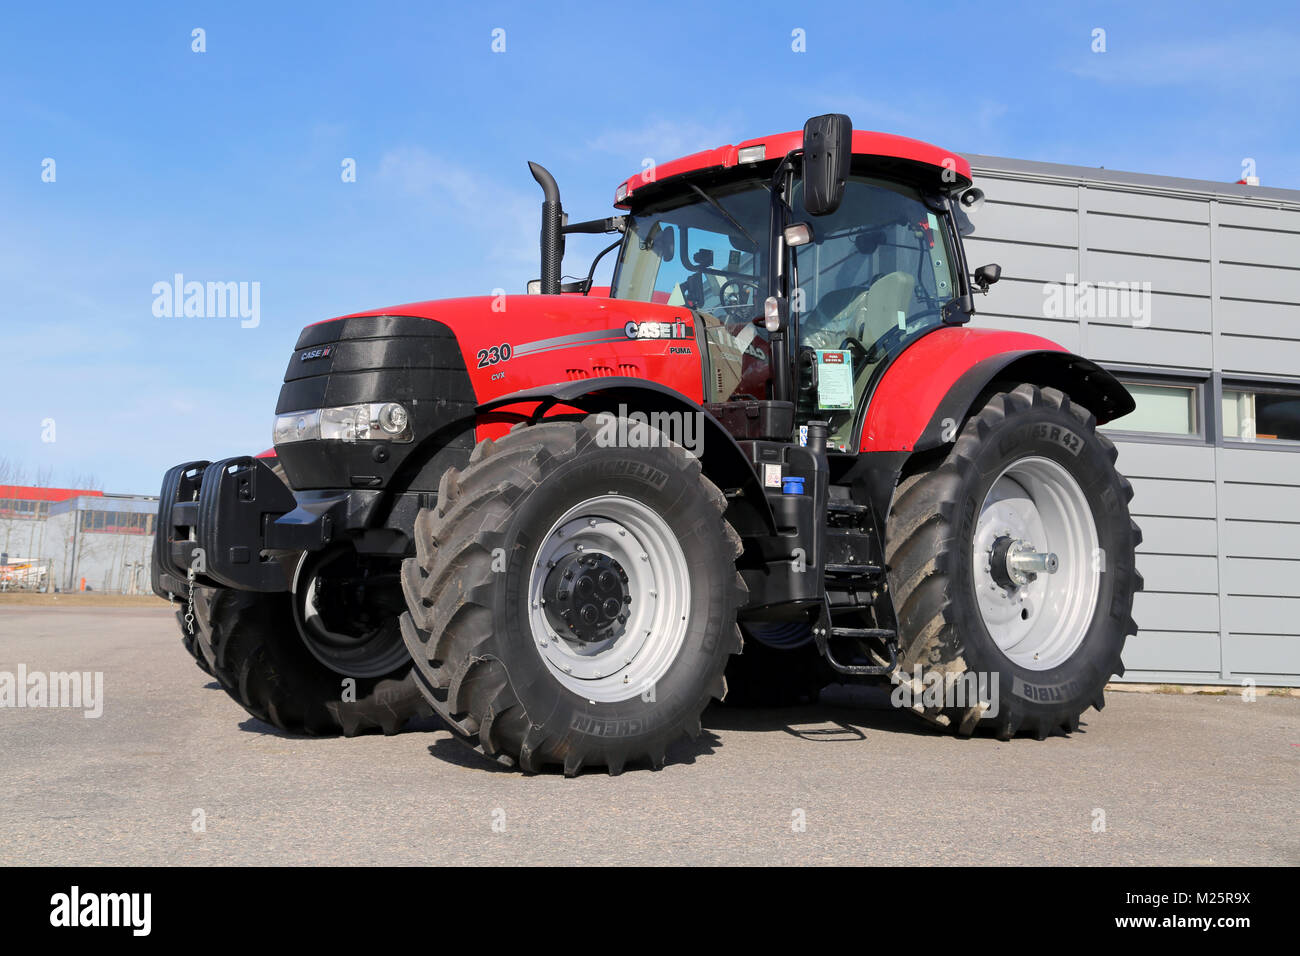 Contractor catalog cup TURKU, FINLAND - APRIL 5, 2014: Case IH Puma 230 CVX Dl agricultural  tractor on display. Case IH wins two gold medals at AGROTECH - the 20th  Internati Stock Photo - Alamy